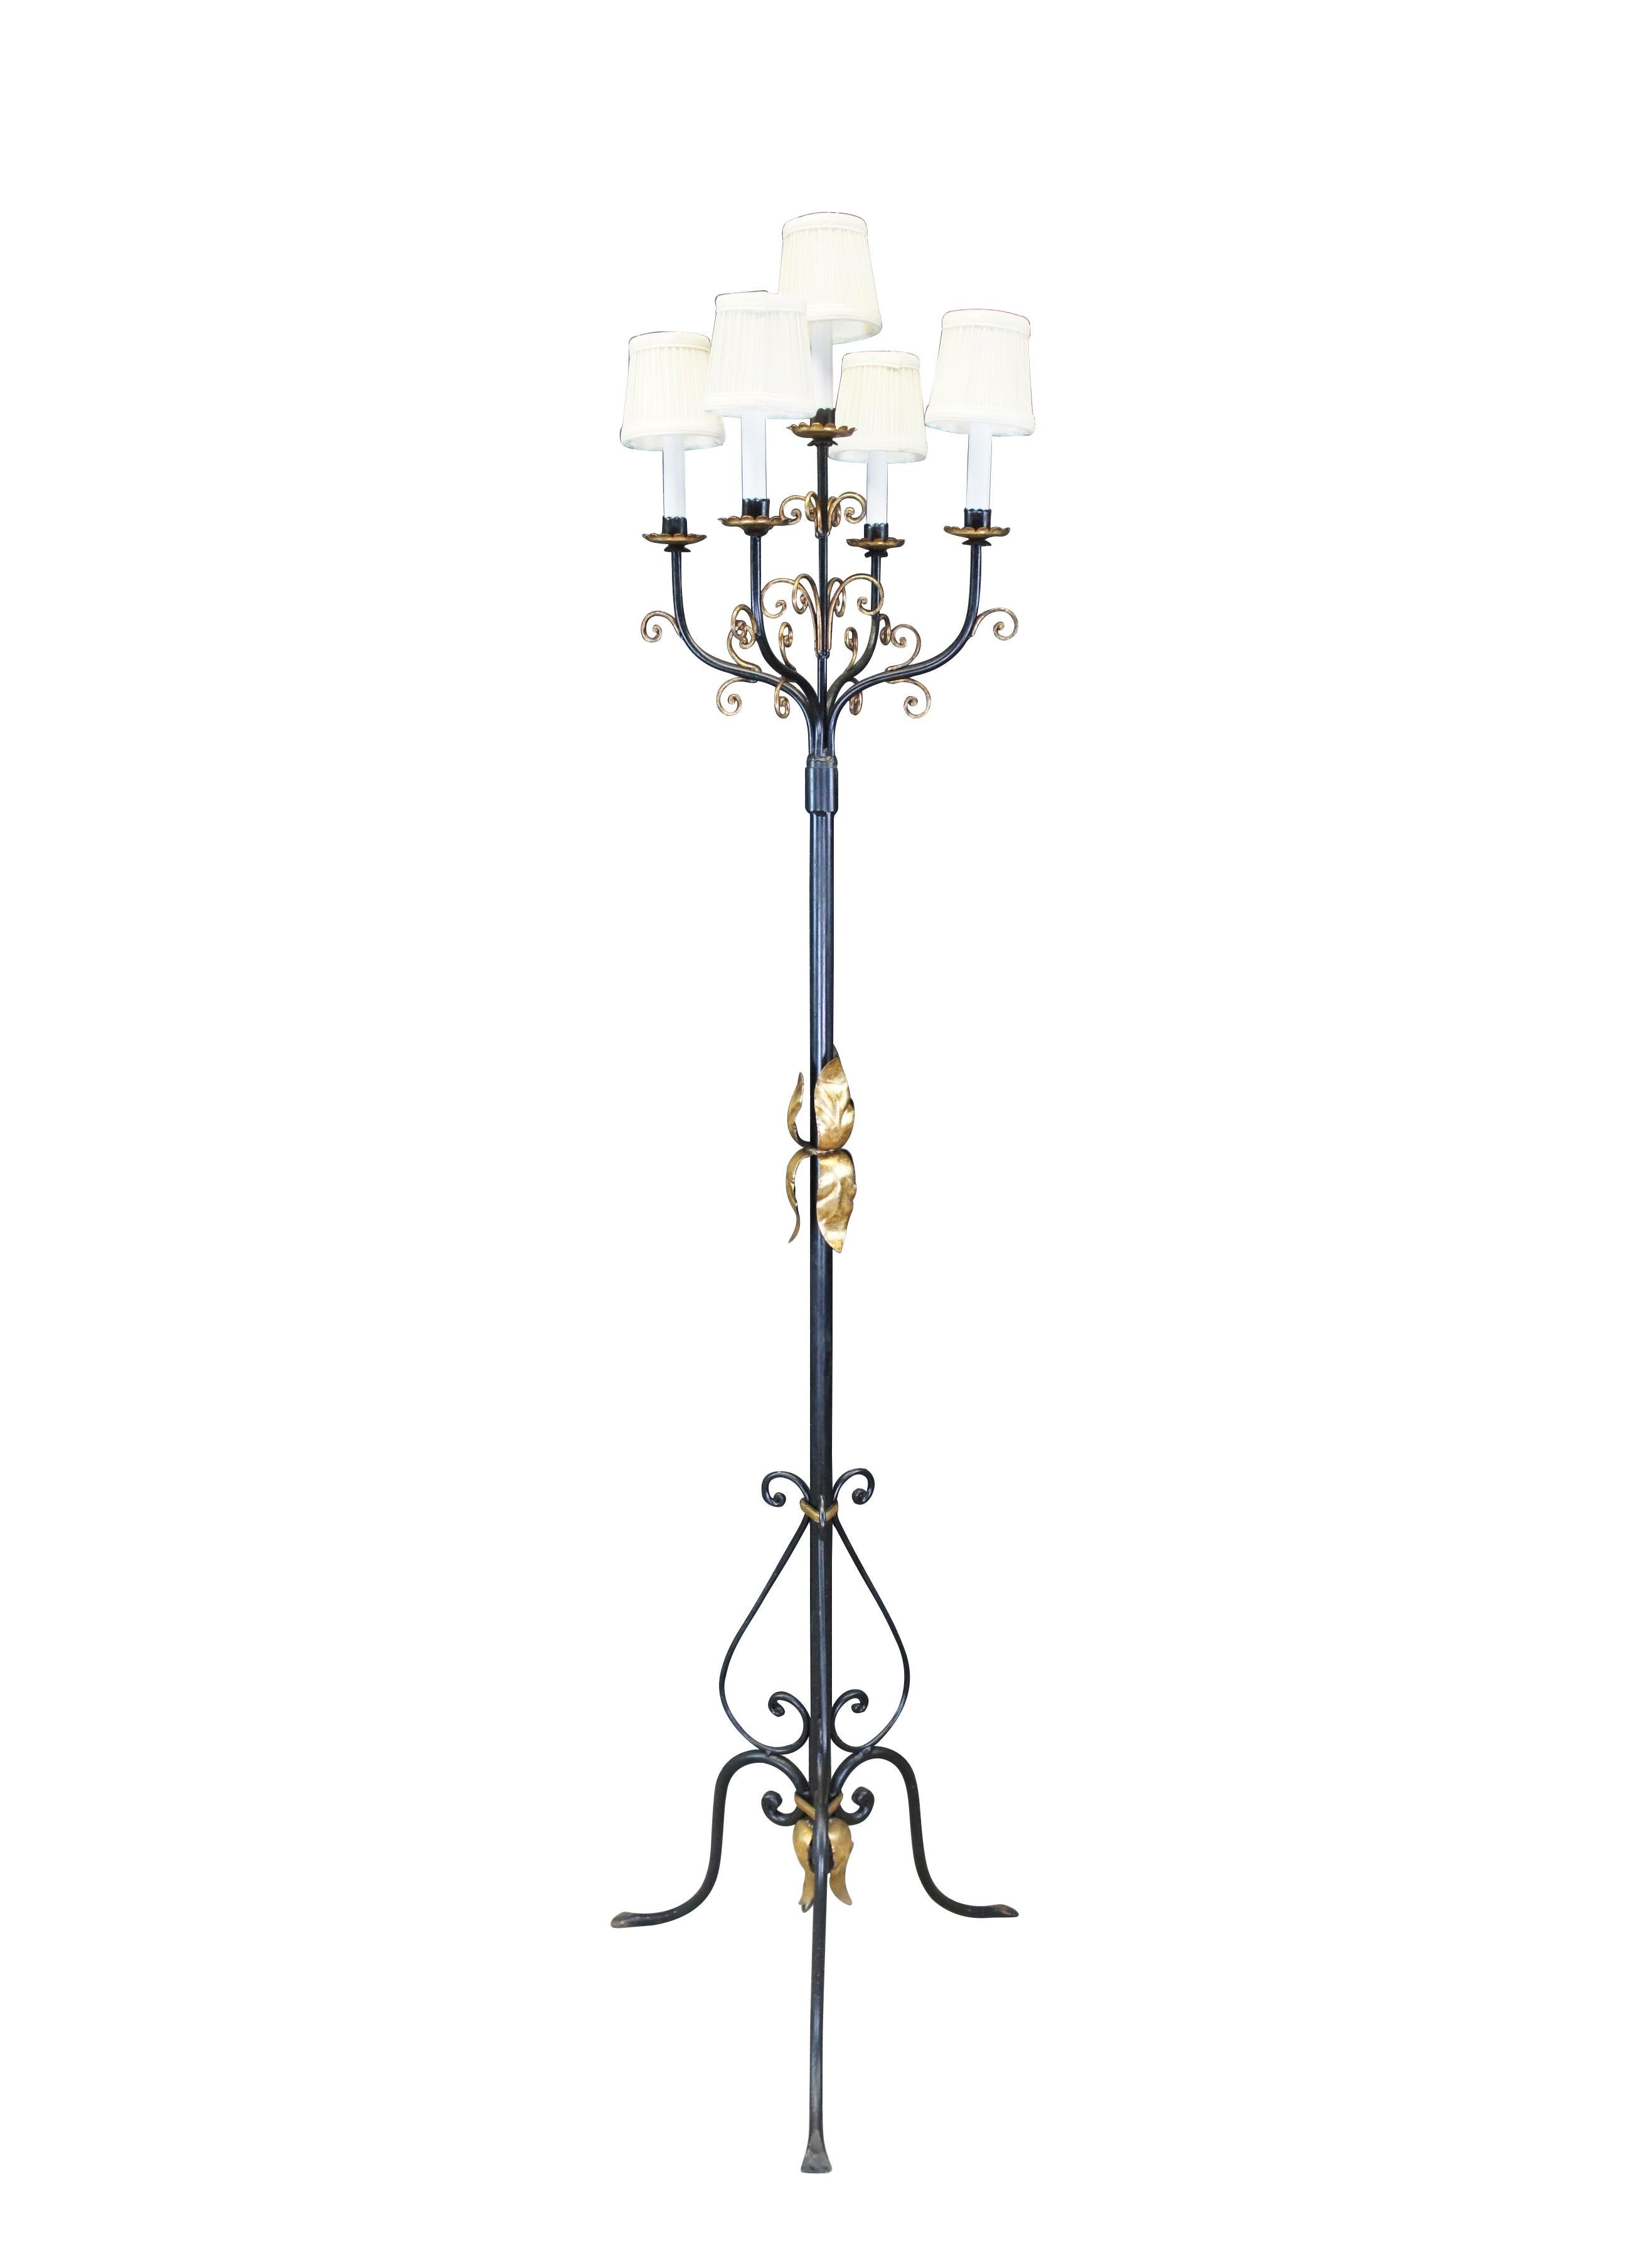 Tall vintage French Gothic Revival five light floor lamp featuring scrolled black iron with gold acanthus accents and a five arm candlestick candelabra.